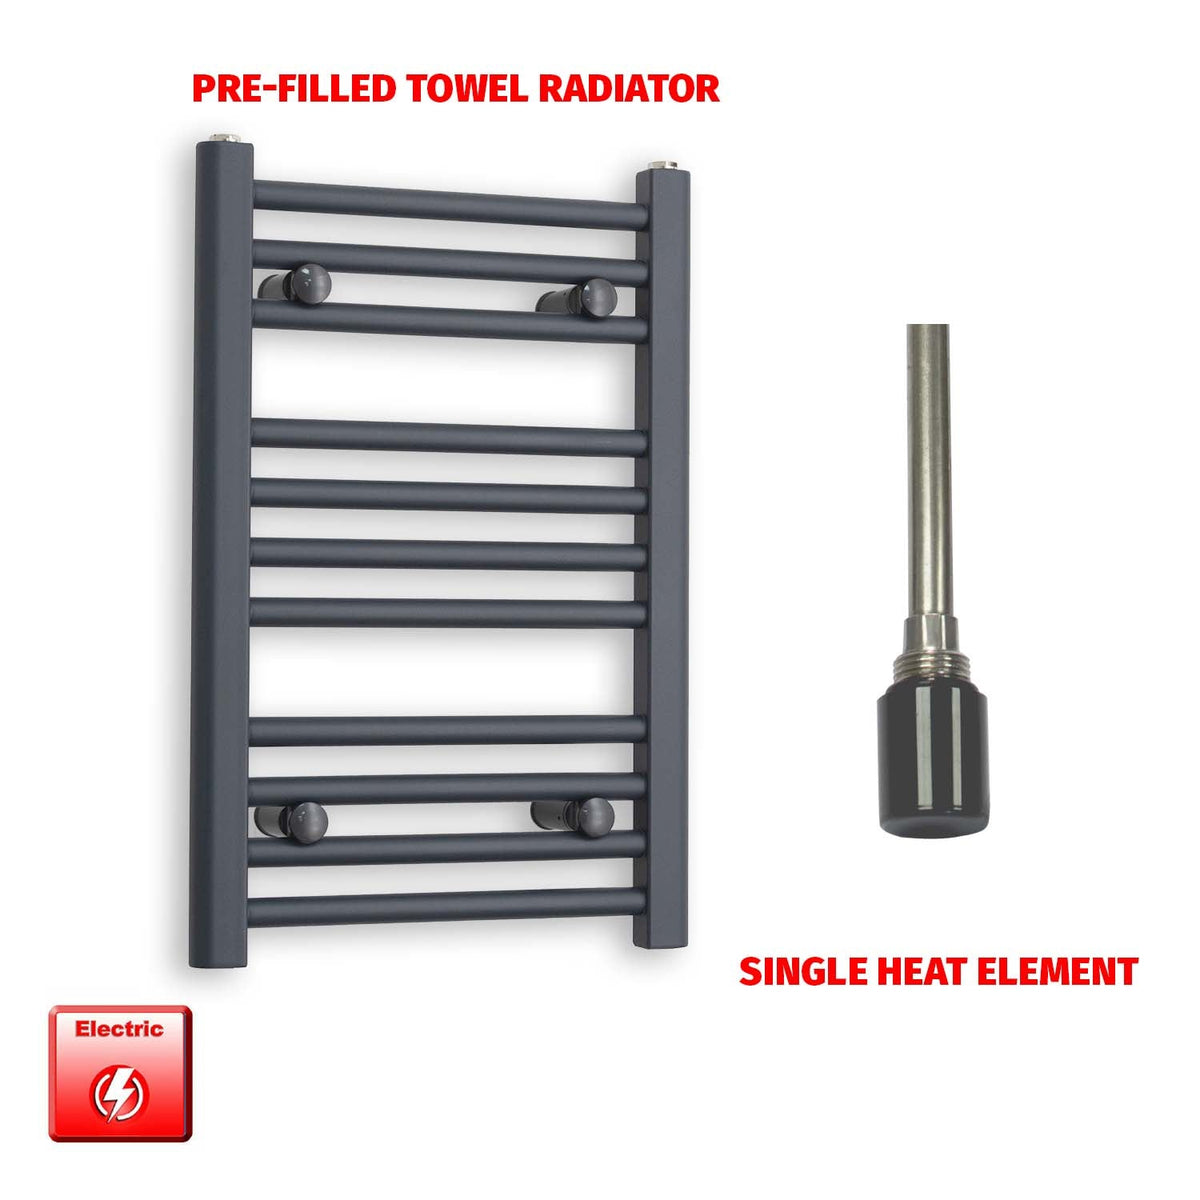 600mm High 400mm Wide Flat Anthracite Pre-Filled Electric Heated Towel Rail Radiator HTR Single heat element no timer